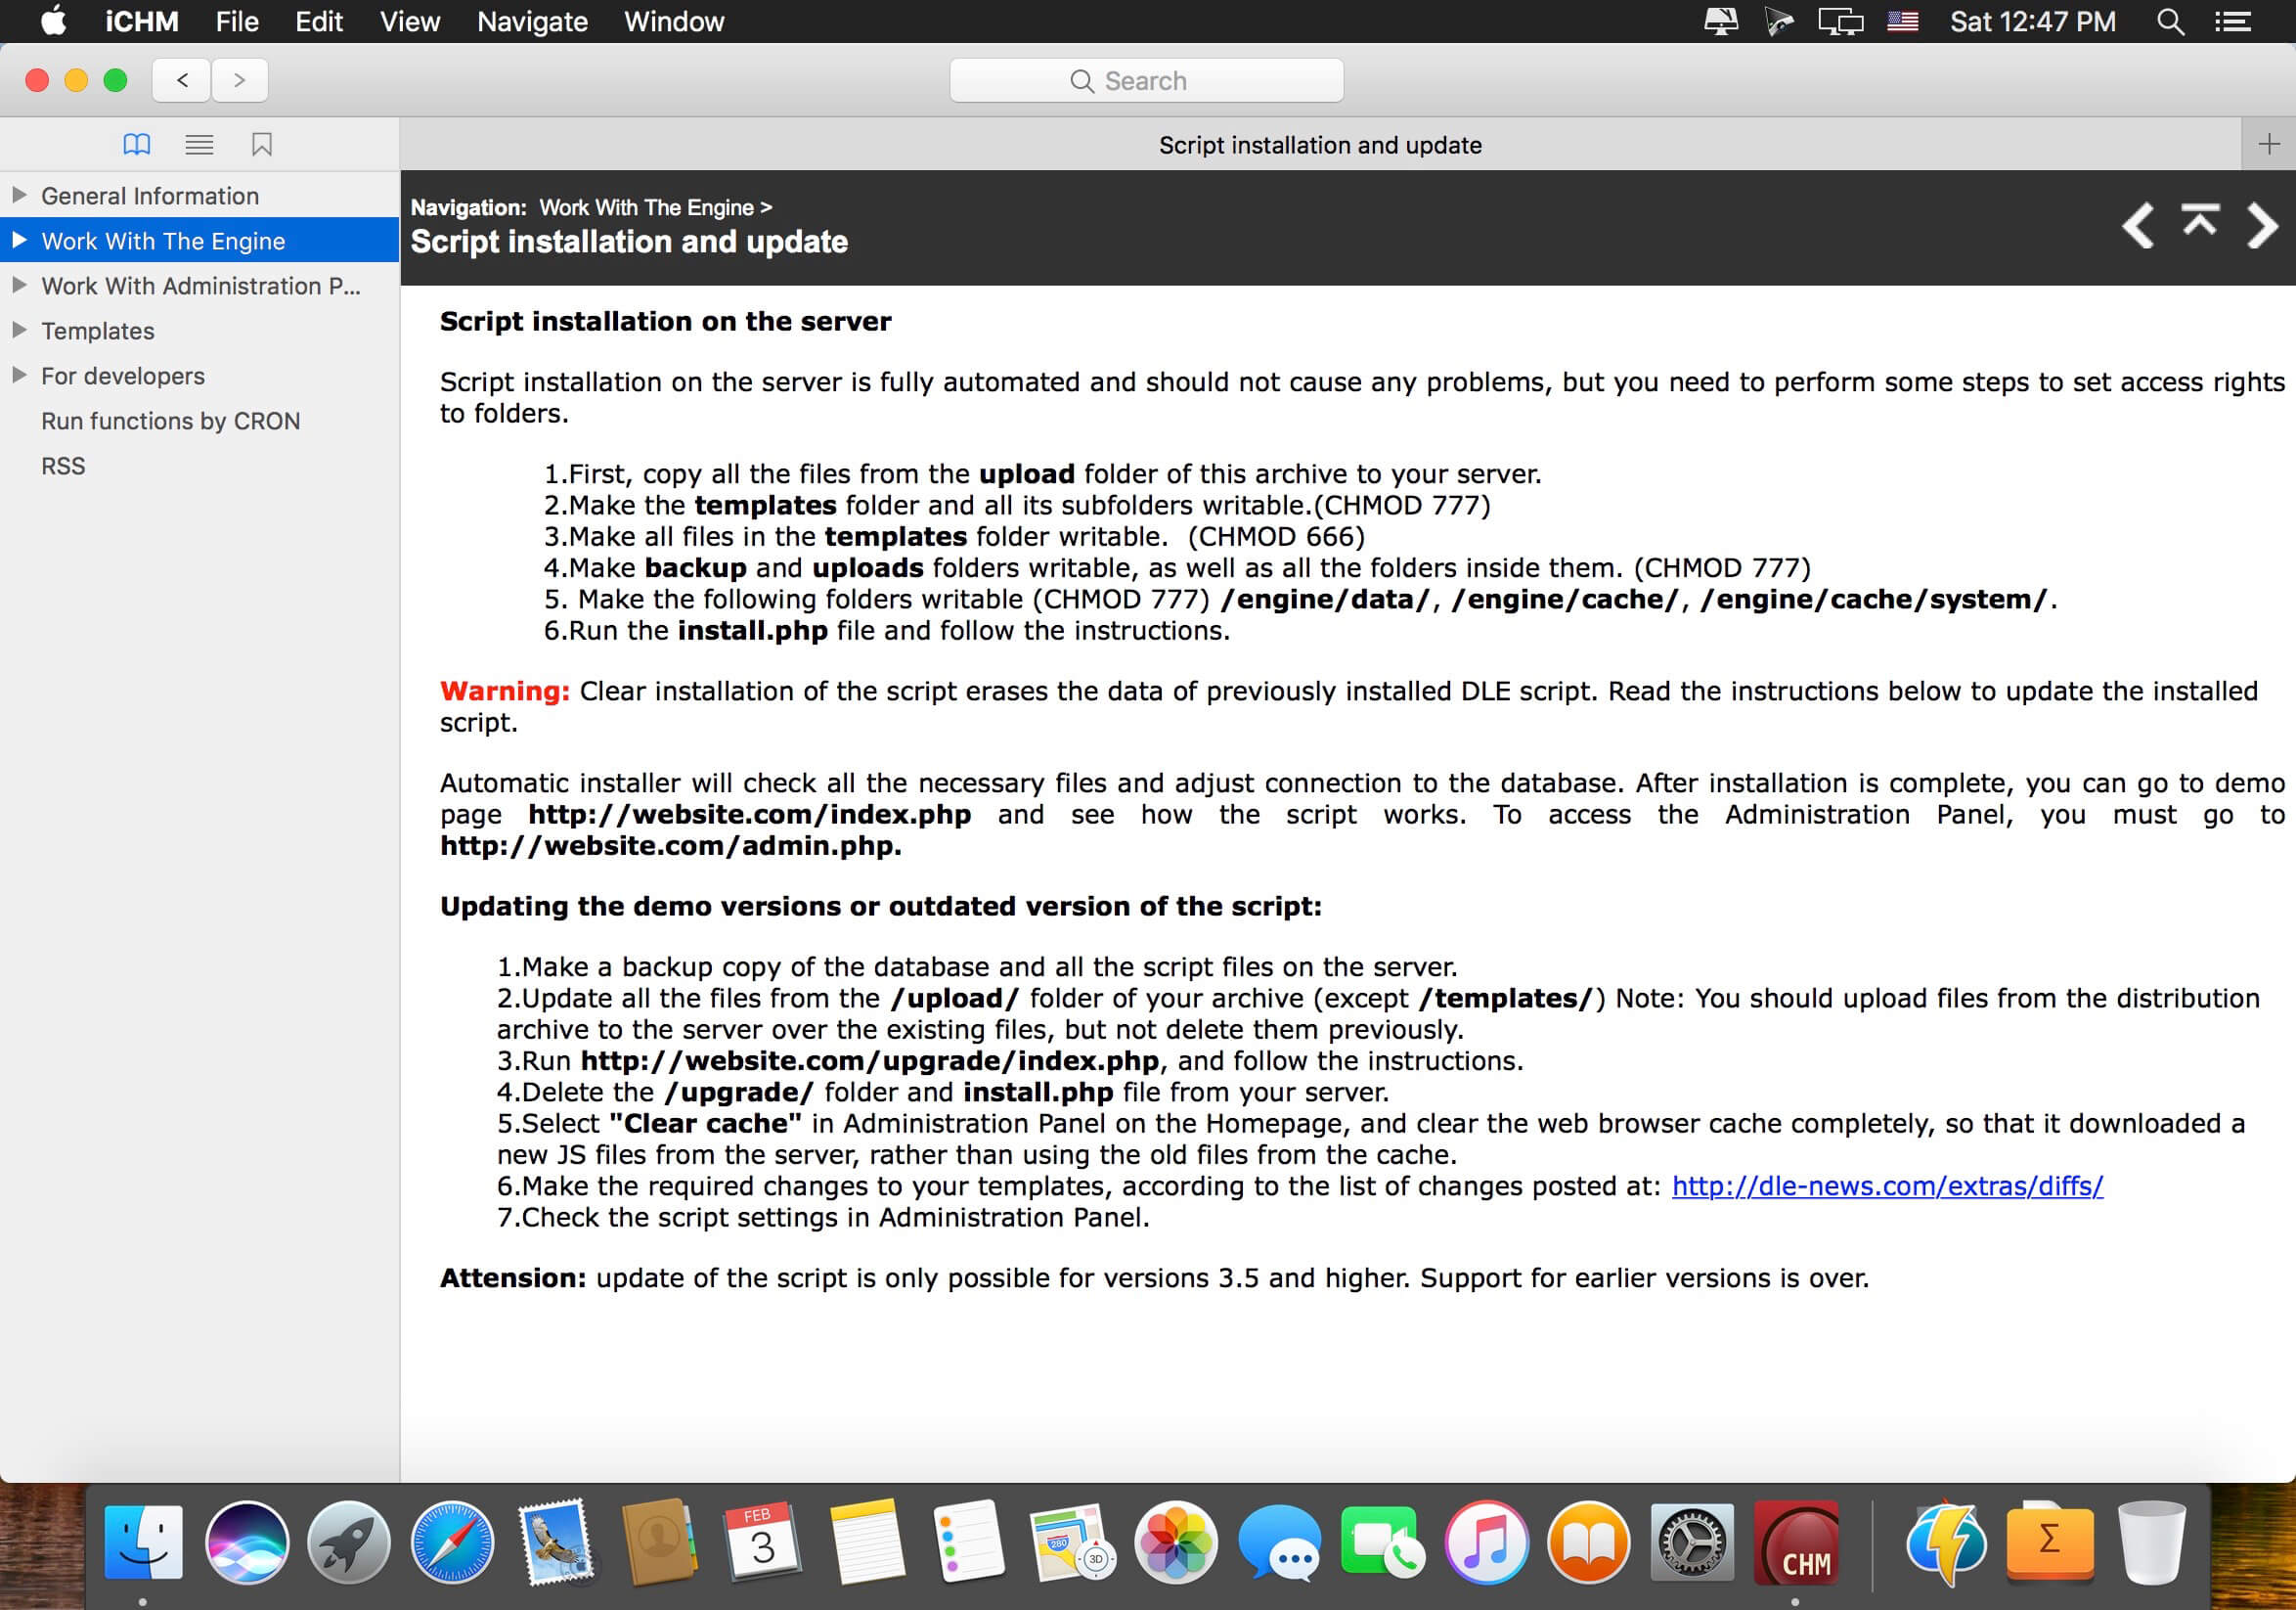 chm reader for mac free download